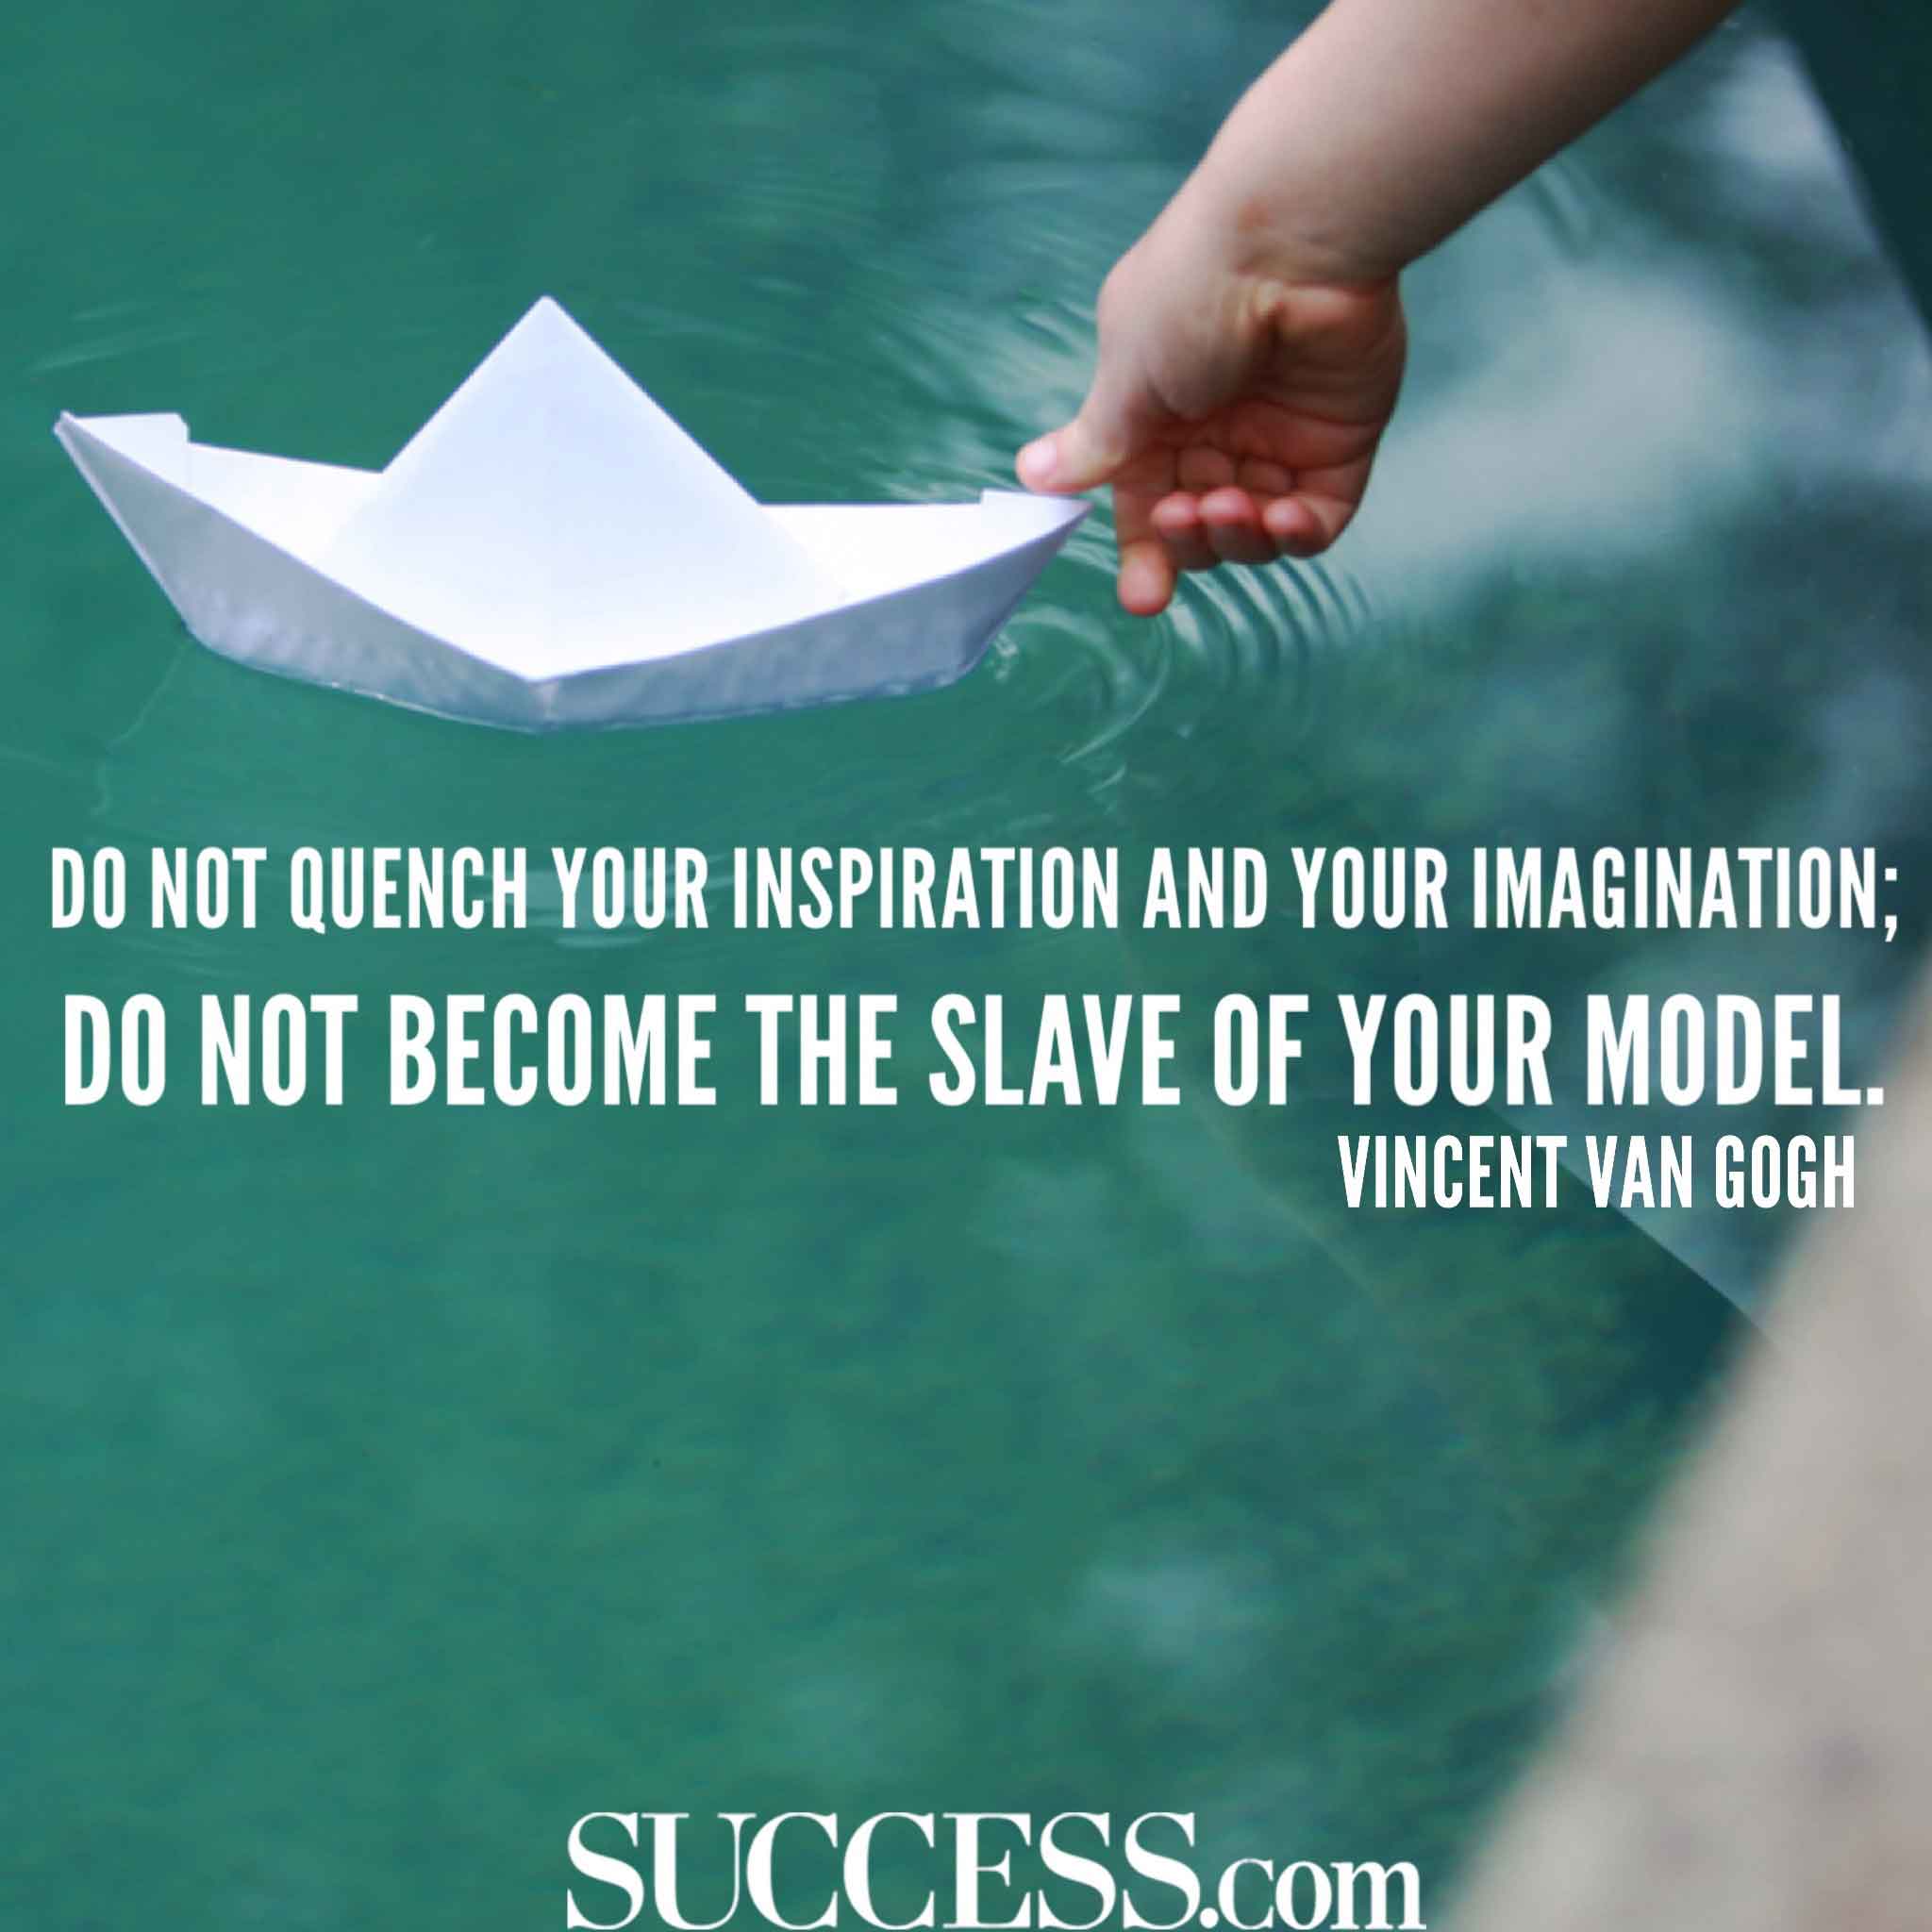 Do not quench you inspiration and your imagination do not become the slave of your model – Vicent Van Gogh